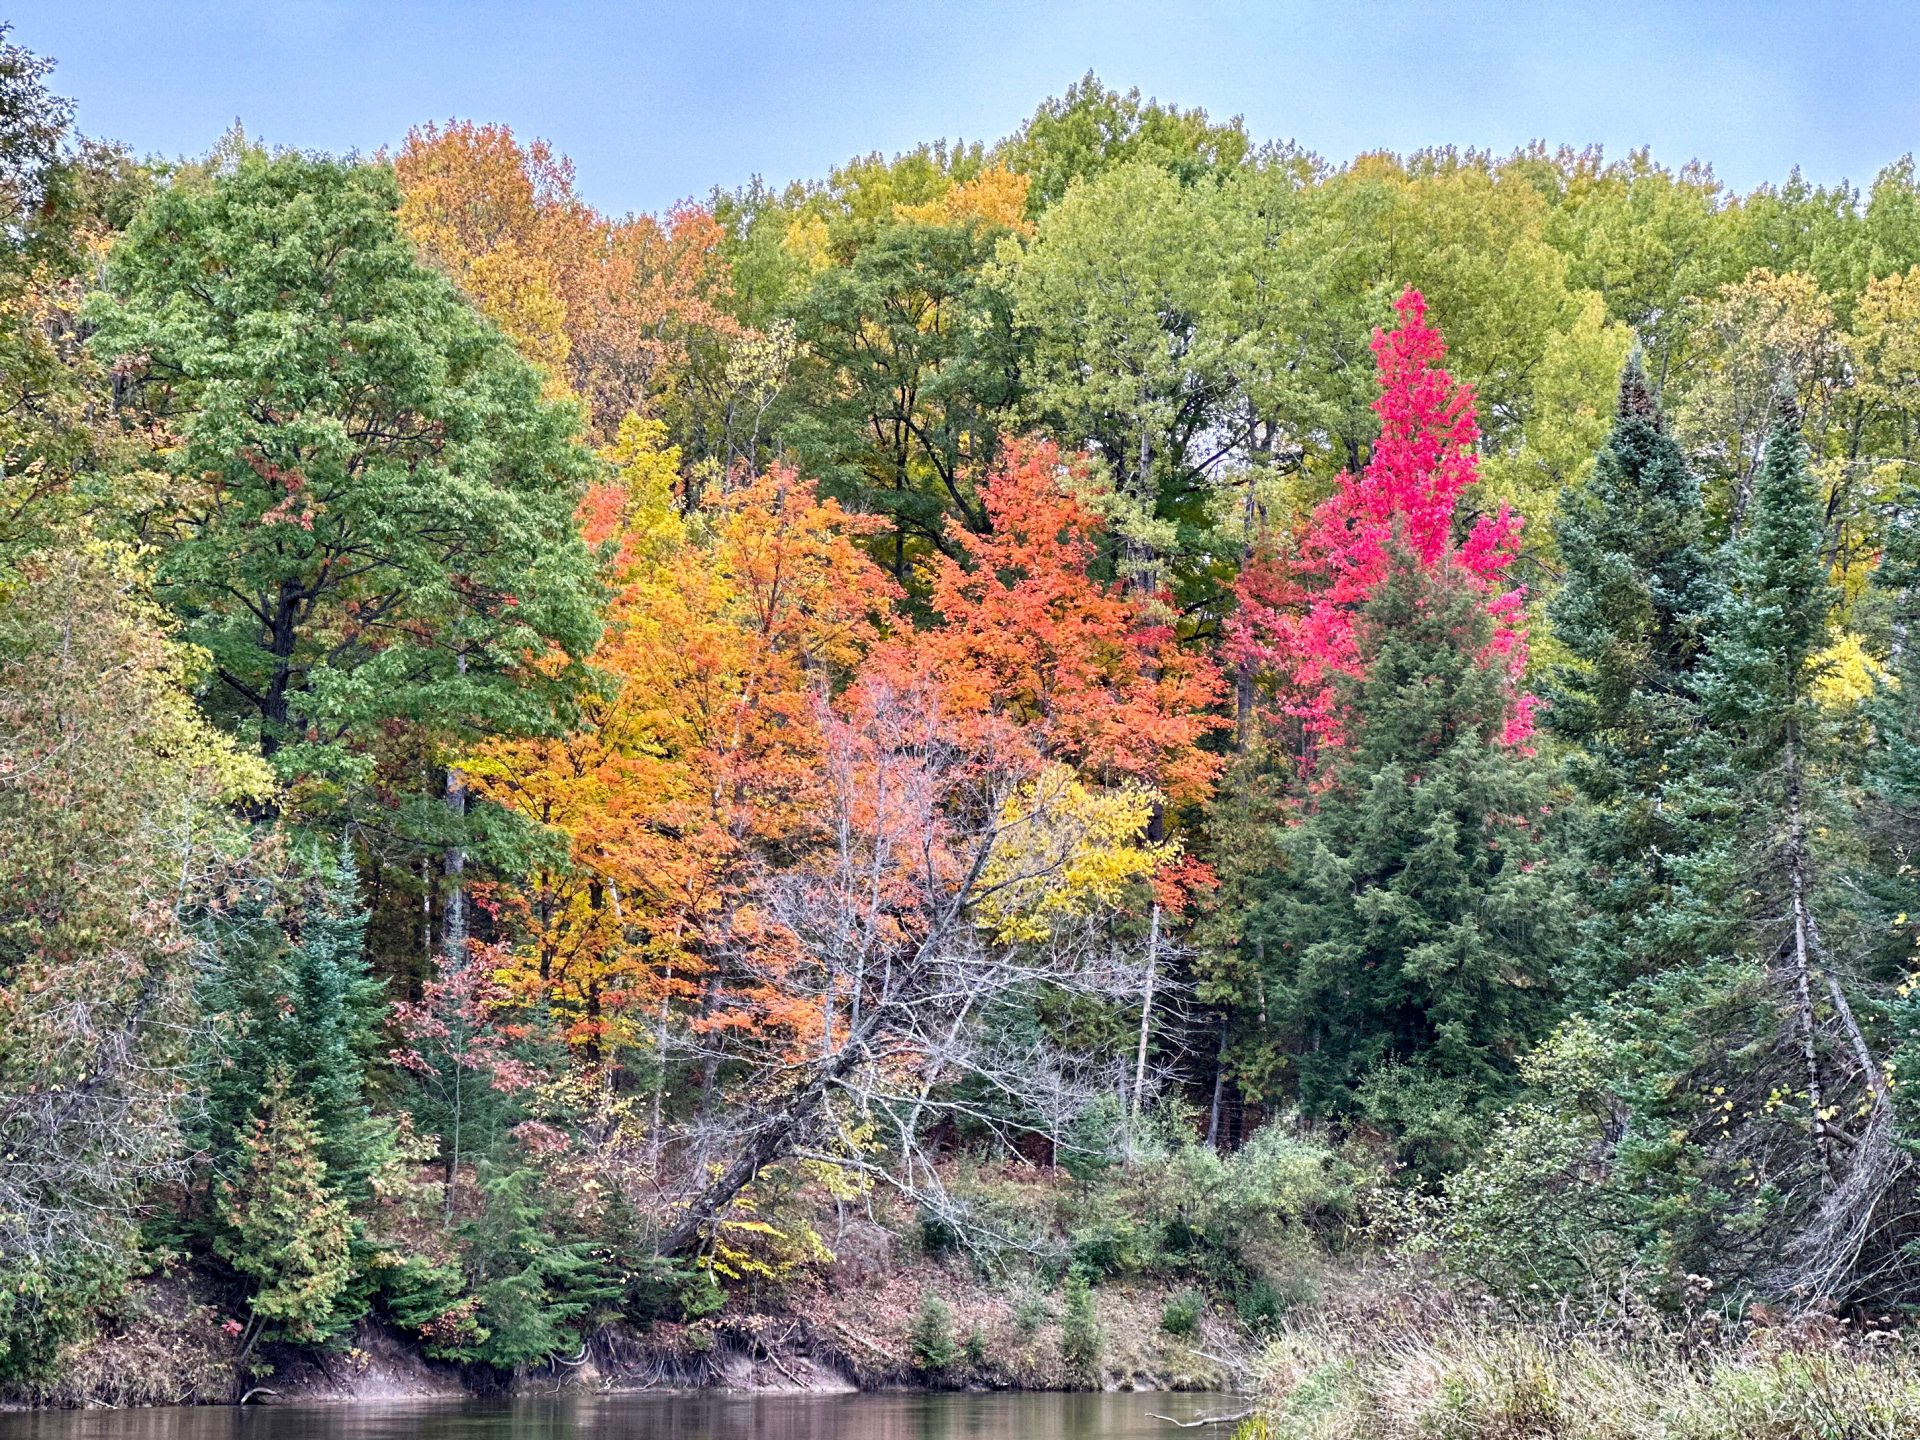 Upper Manistee River in fall colors